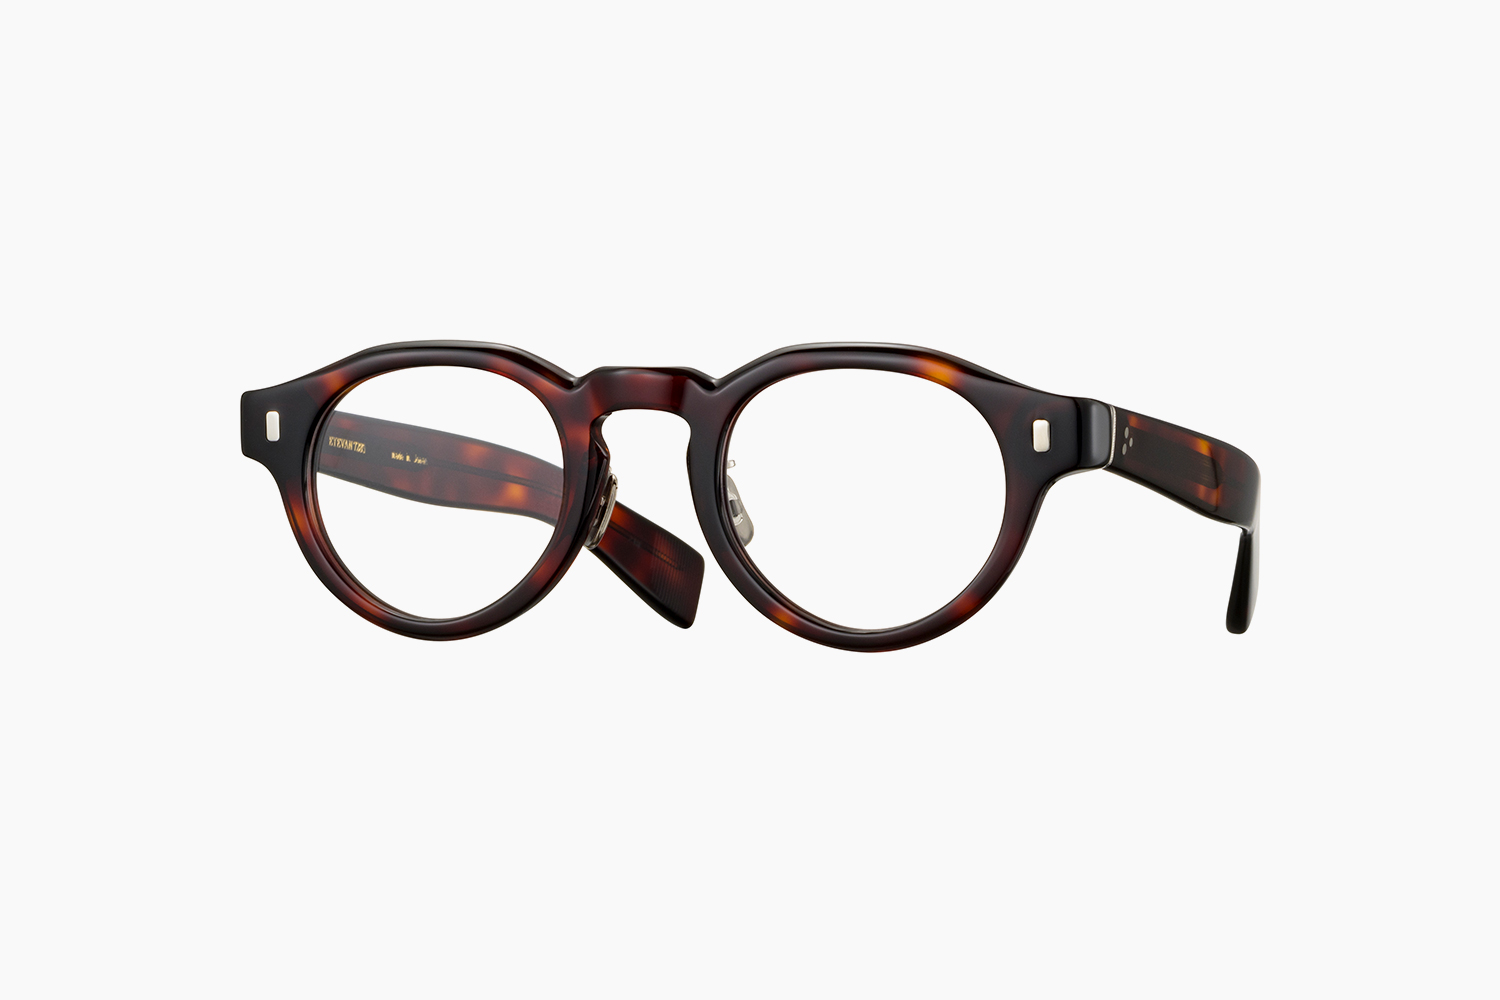 EYEVAN 7285｜18th｜338 - 348｜PRODUCT｜Continuer Inc.｜メガネ 